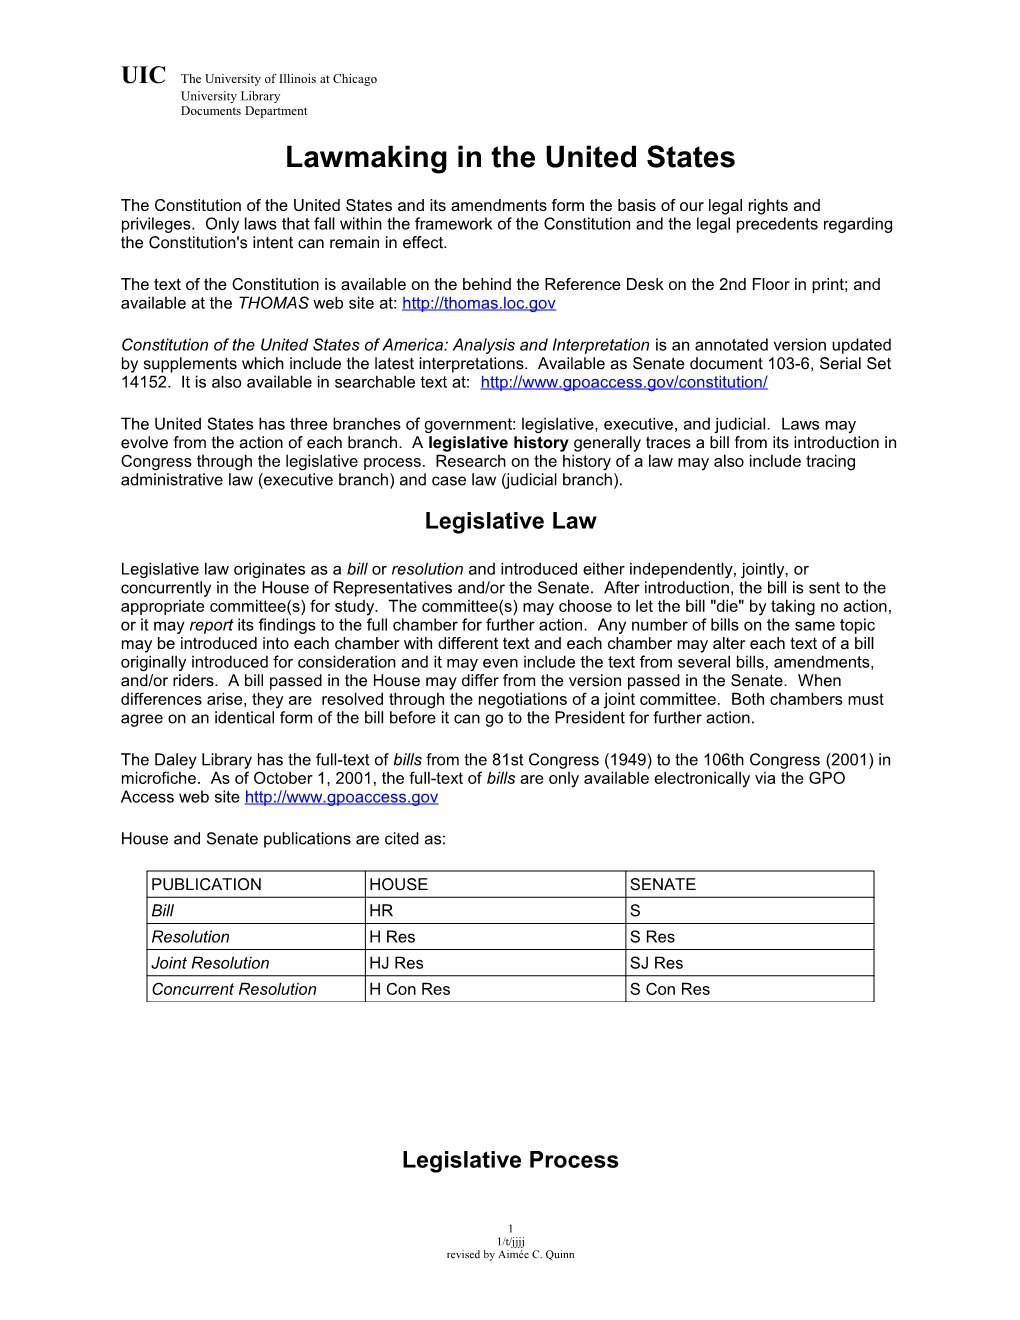 Lawmaking in the United States